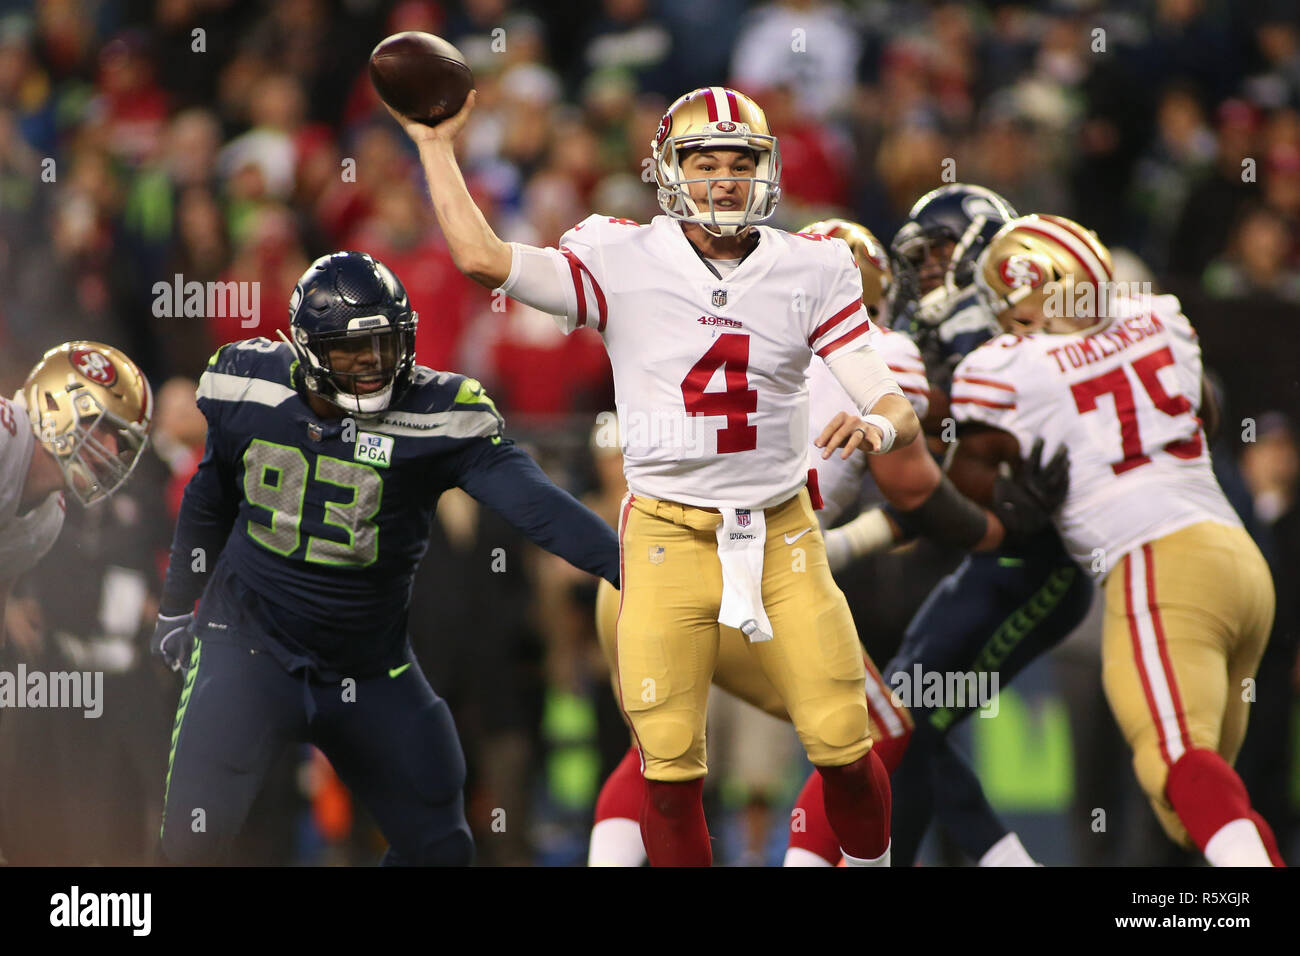 Seattle, WA, USA. 2nd Dec, 2018. San Francisco 49ers quarterback Nick Mullens (4) escapes the pressure in the pocket during a game between the San Francisco 49ers and the Seattle Seahawks at CenturyLink Field in Seattle, WA. Seahawks defeat the 49ers 43-16. Sean Brown/CSM/Alamy Live News Stock Photo